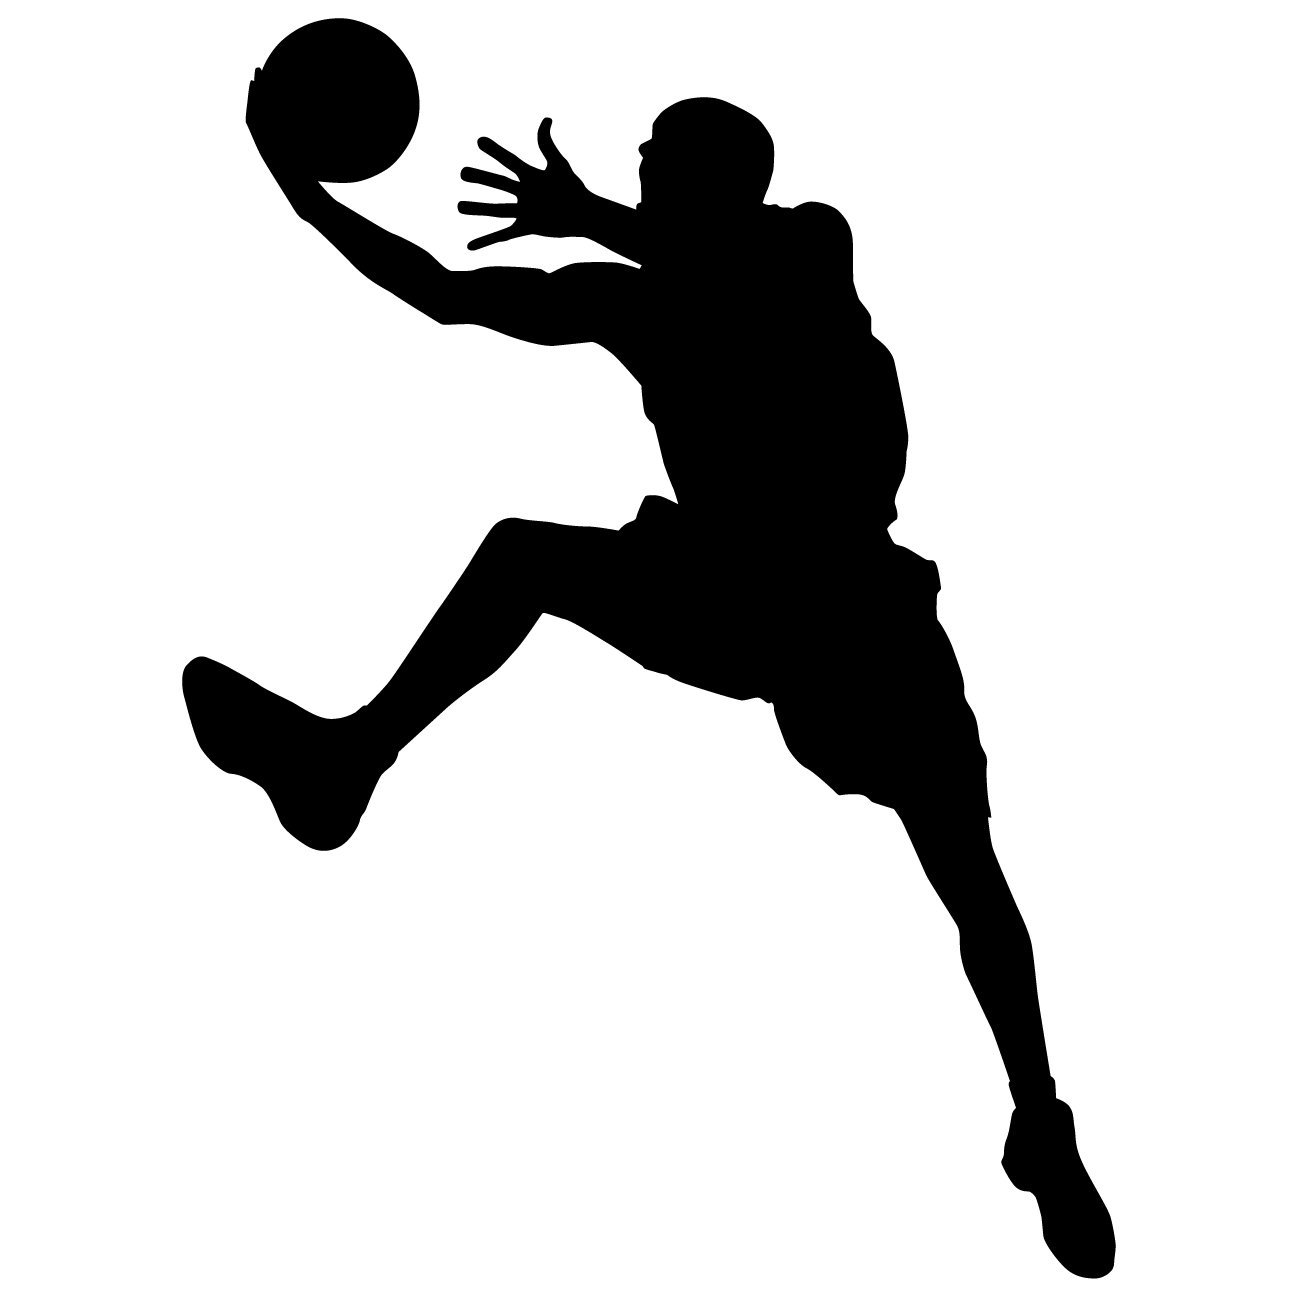  - Wall Sticker Decal - Basketball Silhouette Decoration 